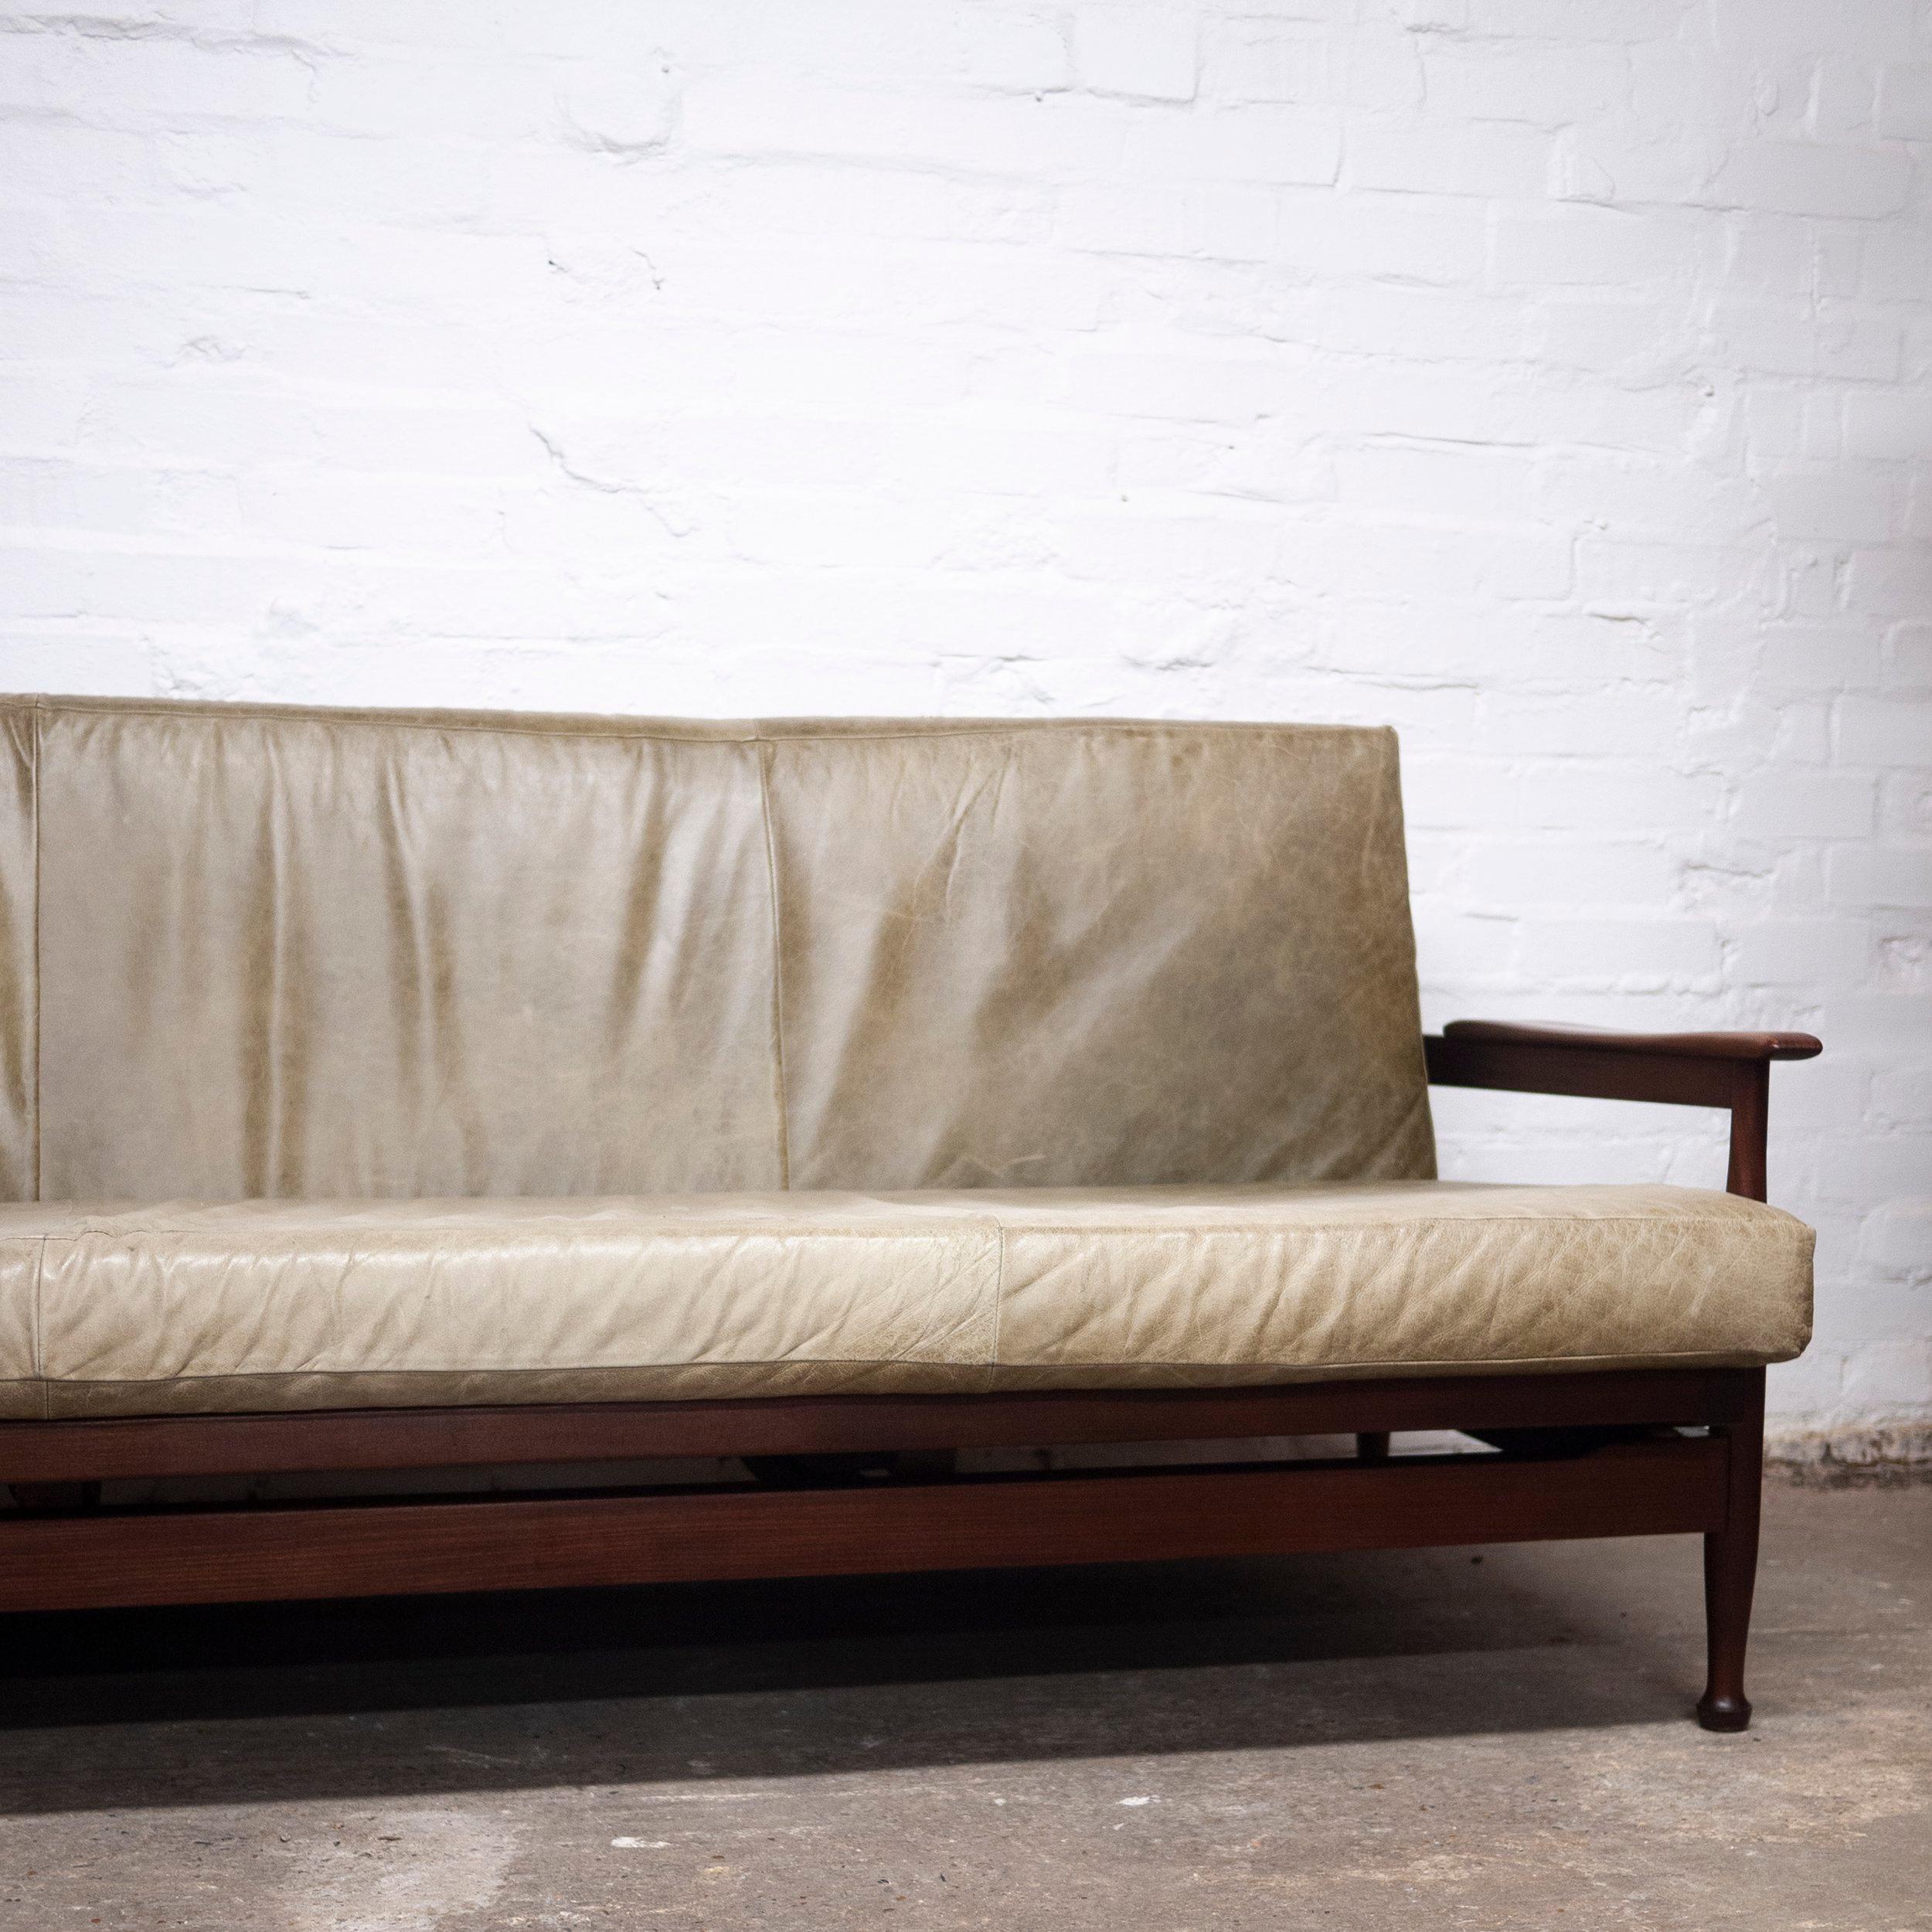 British Manhattan Afromosia and Green Leather Sofa Bed by Guy Rogers, 1960s For Sale